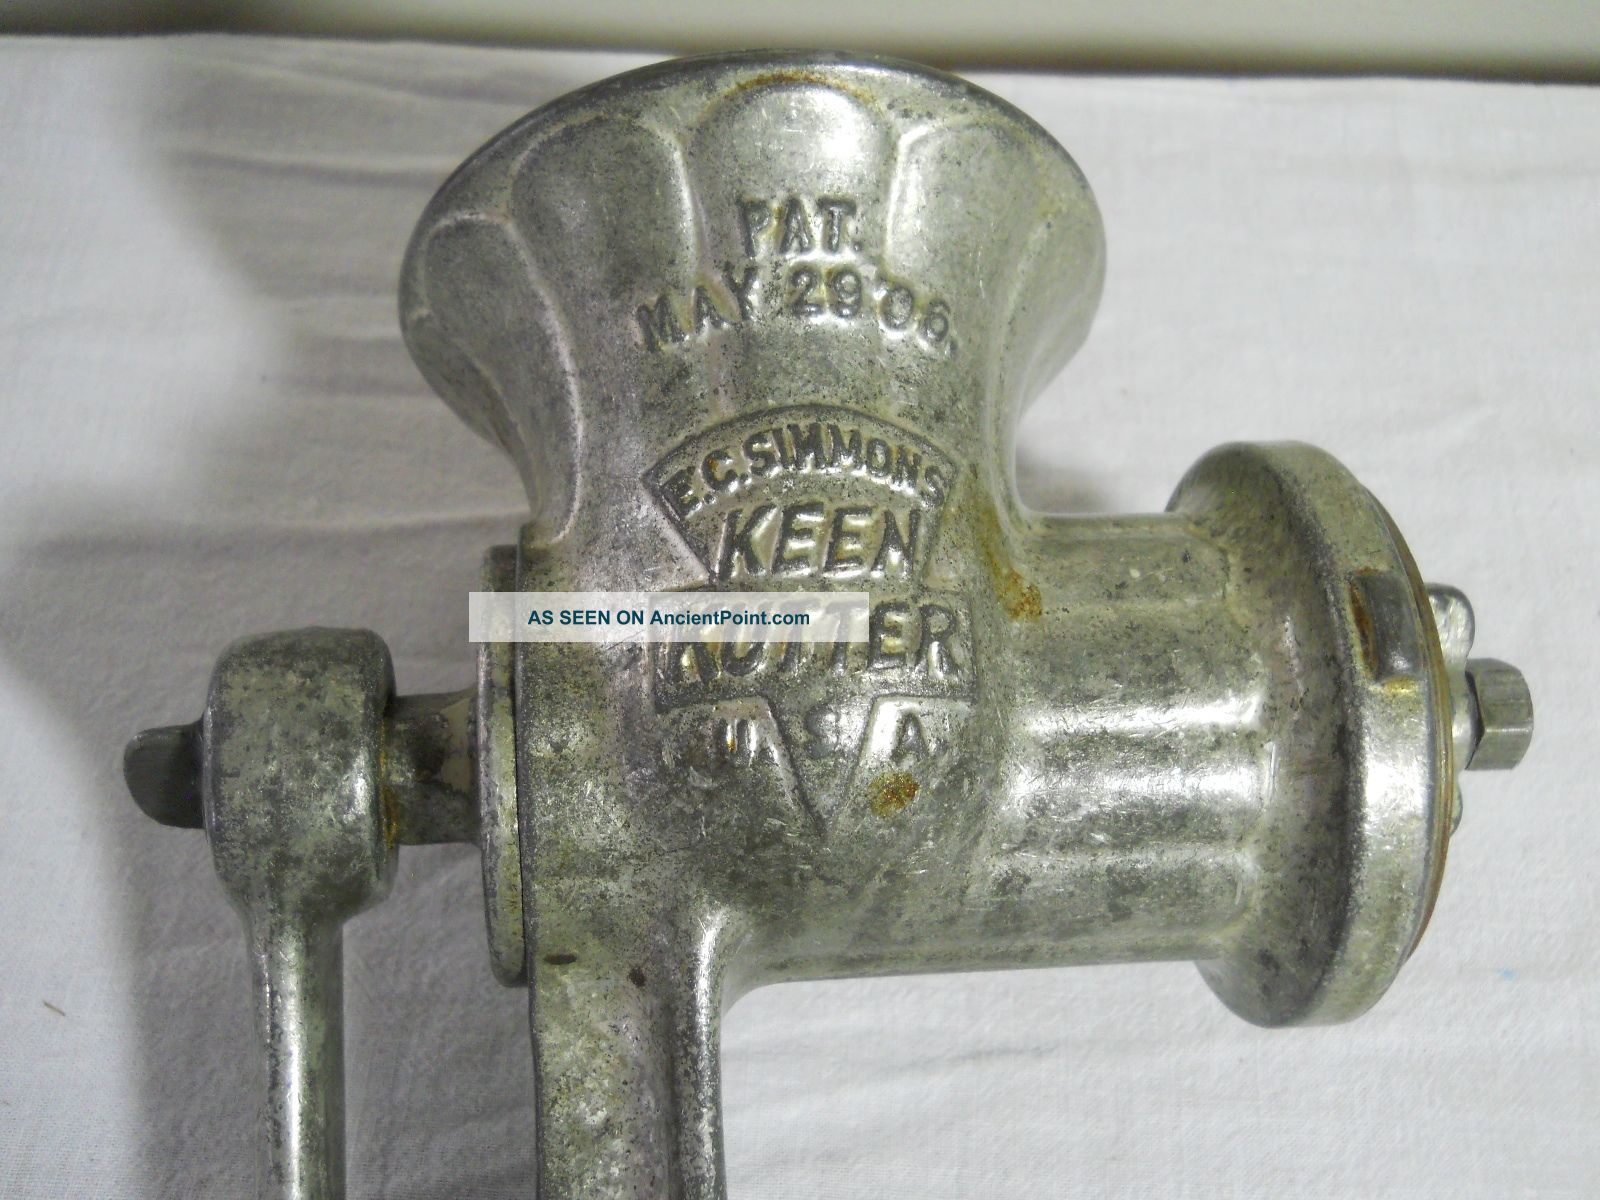 Keen Kutter Meat Grinder May 29 1896 Or 1906 Kk13 E. C. Simmons Meat ...